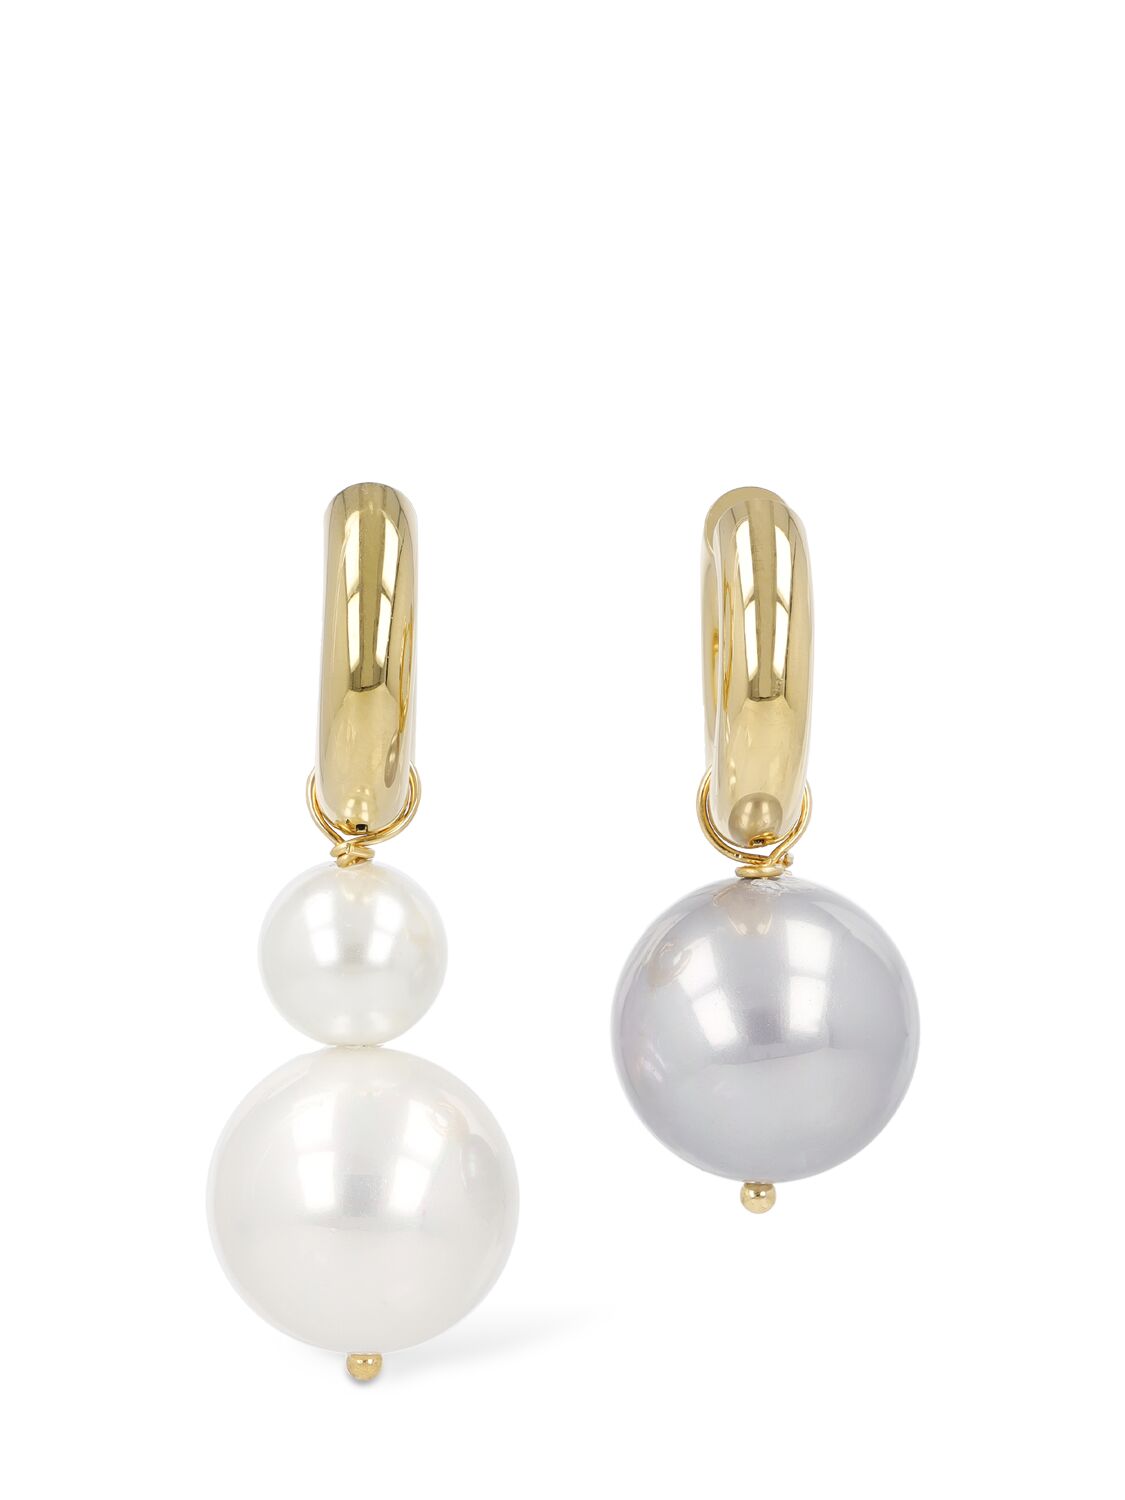 Image of Pearl Mismatched Earrings